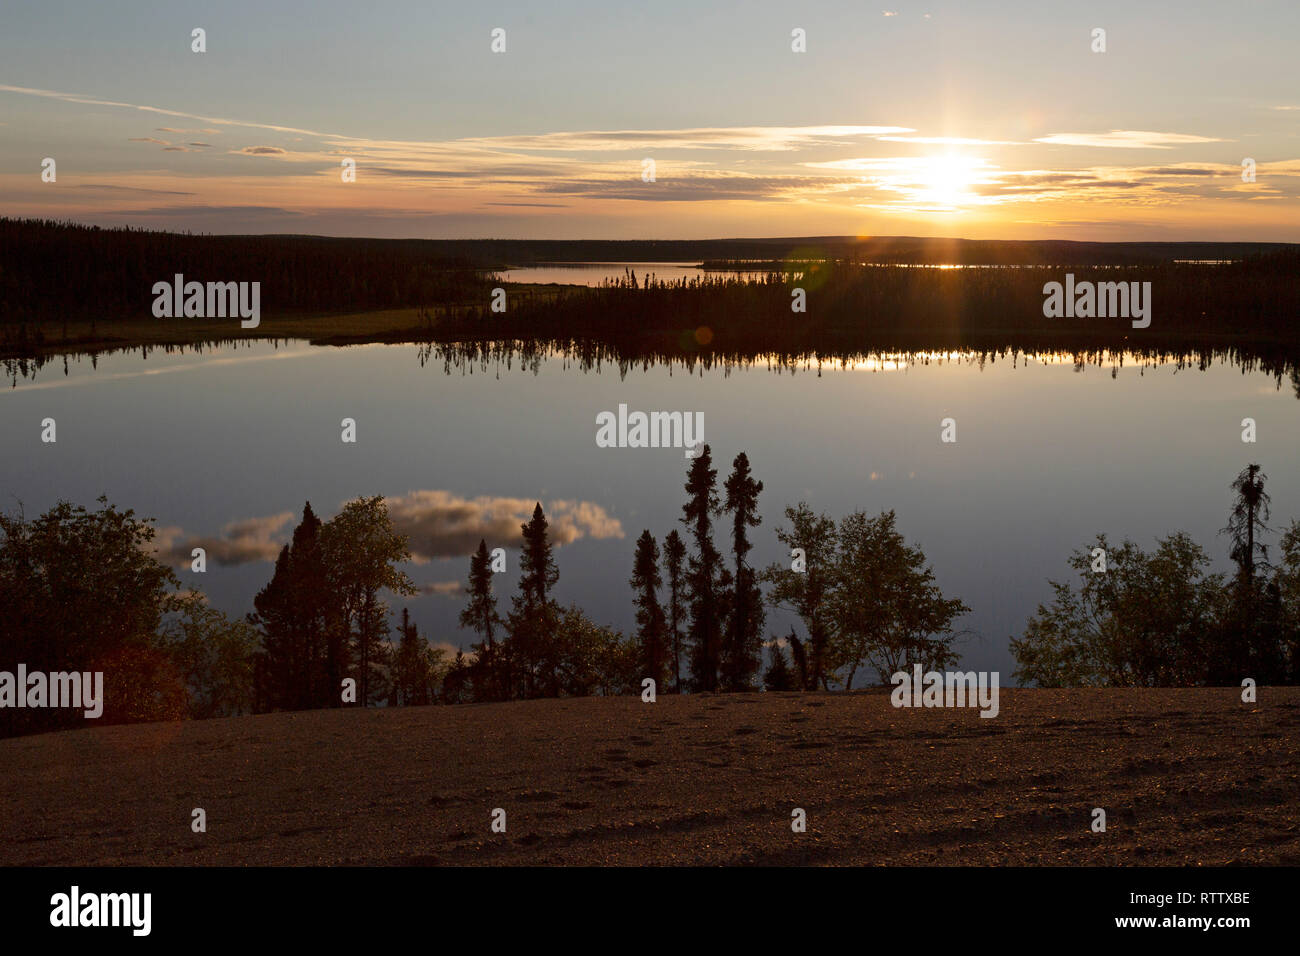 Sundown over Dillabough Lake in northen Manitoba, Canada. The sun reflects on the surface of the lake. Stock Photo